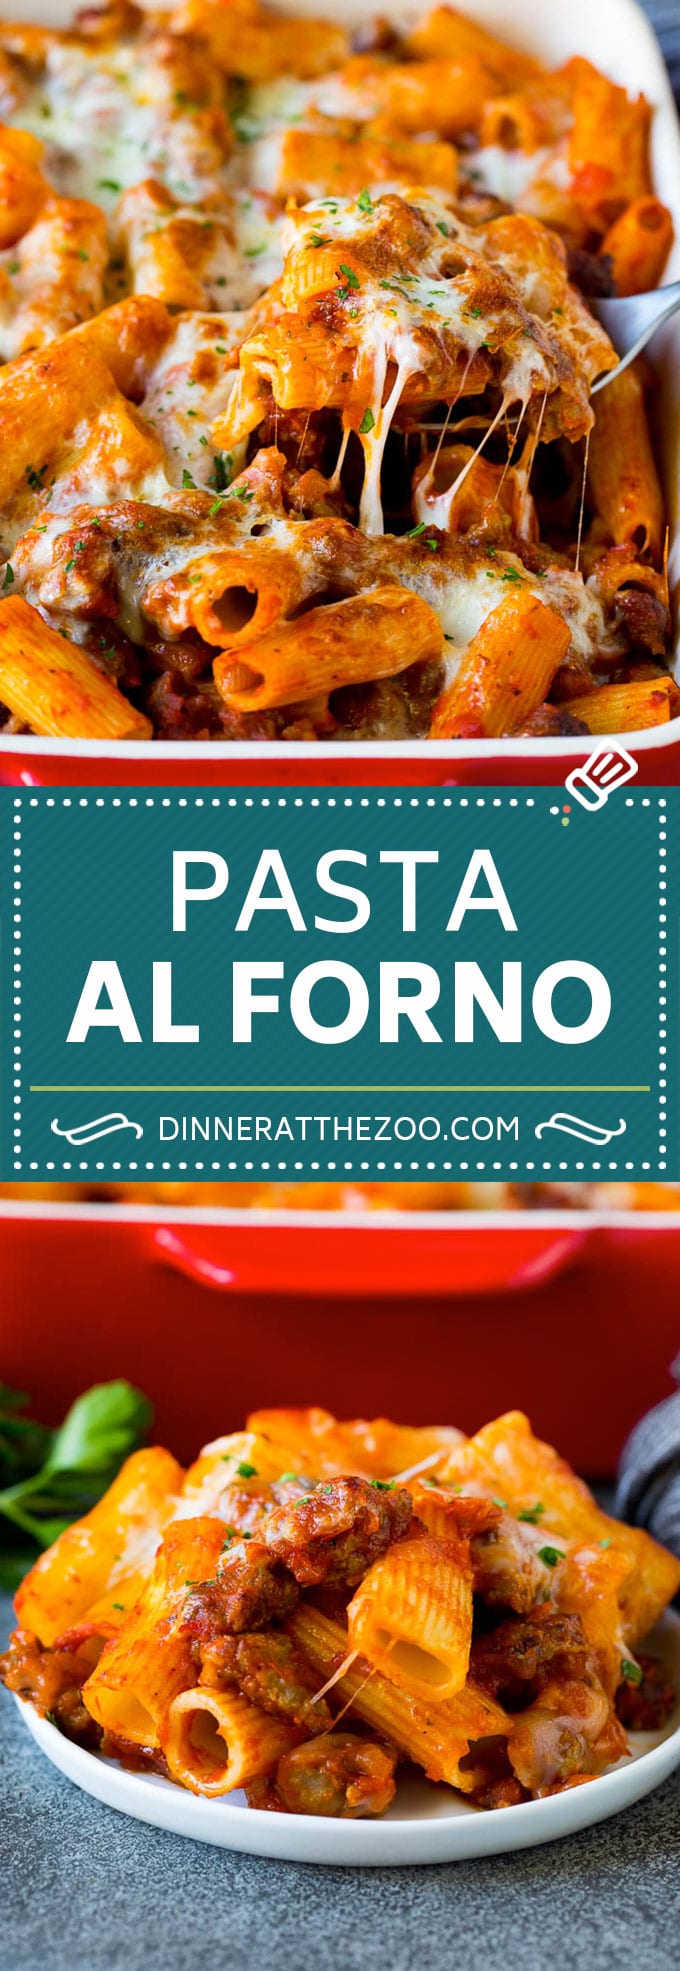 Pasta al Forno is hearty rigatoni noodles tossed in a savory meat sauce then topped with cheese and baked. #pasta #dinneratthezoo